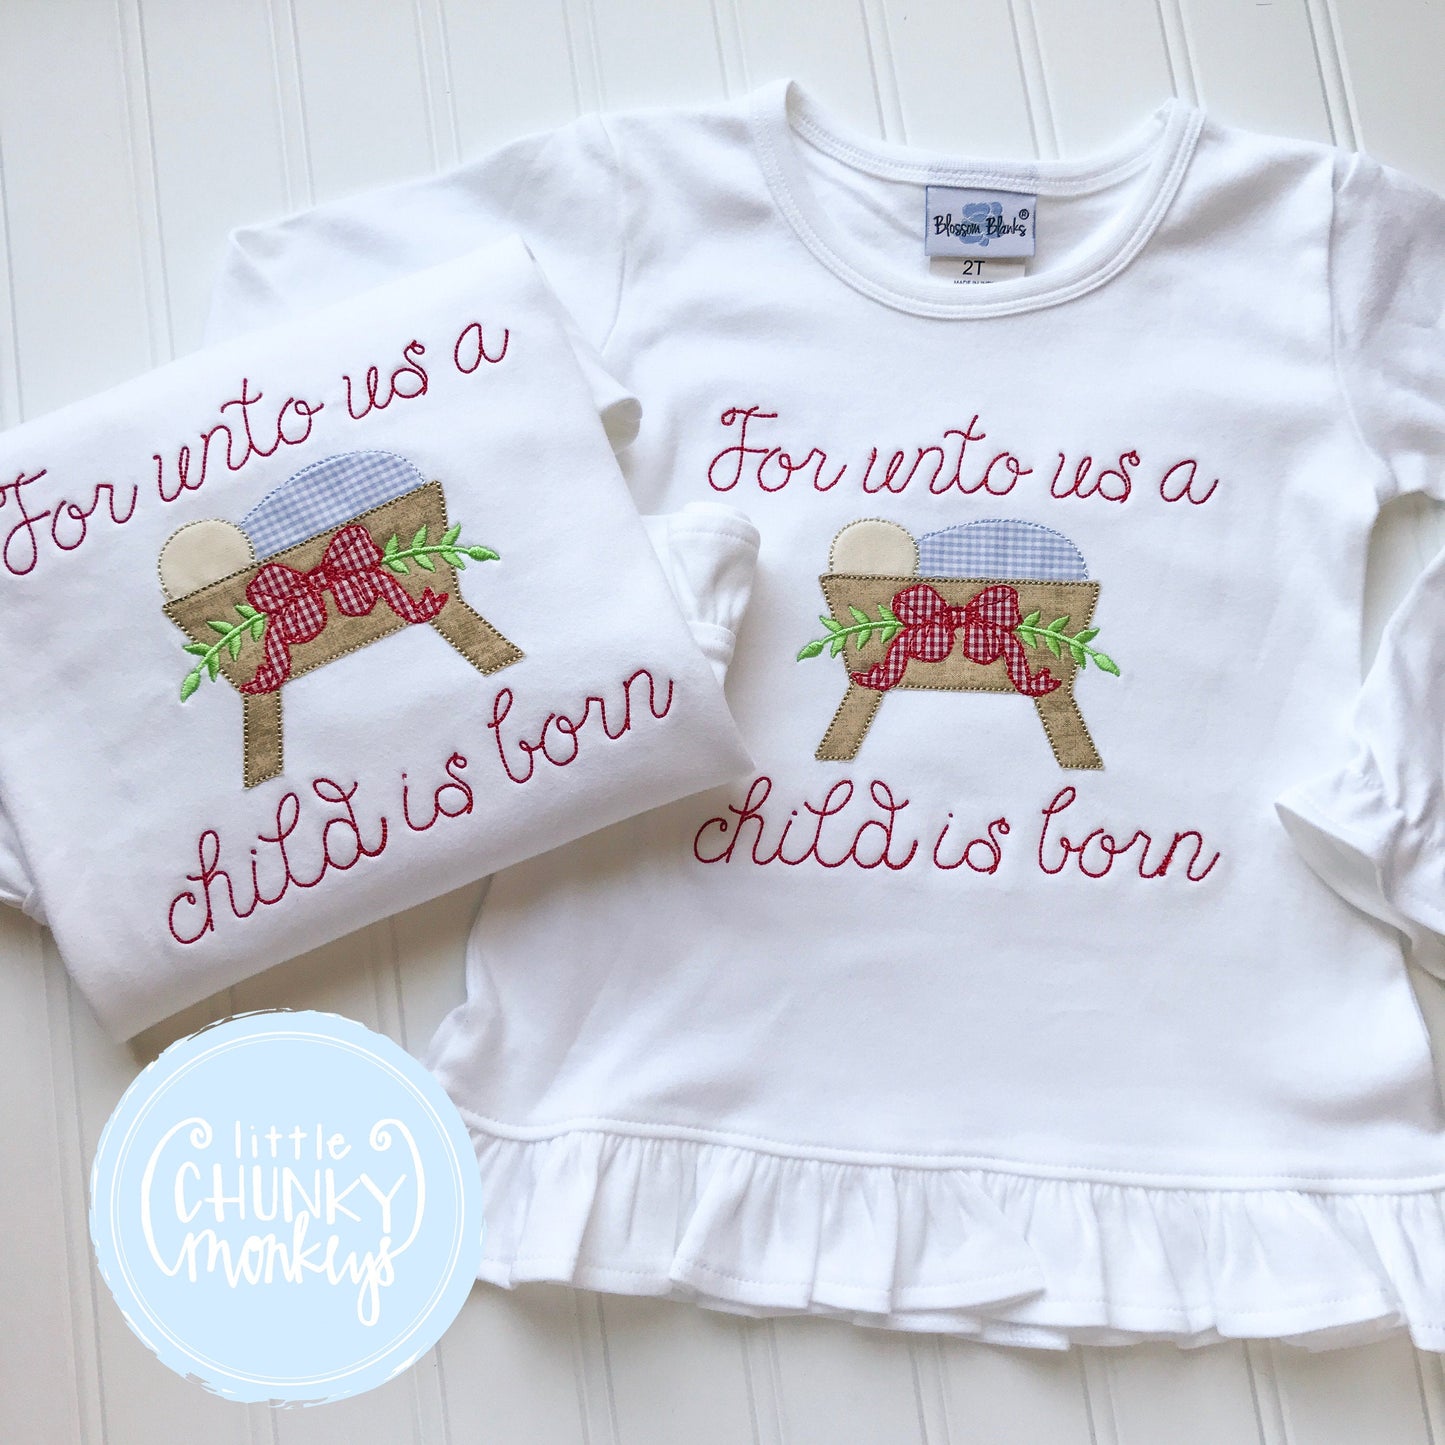 Girl Shirt - Manger with "For unto us a child is born"